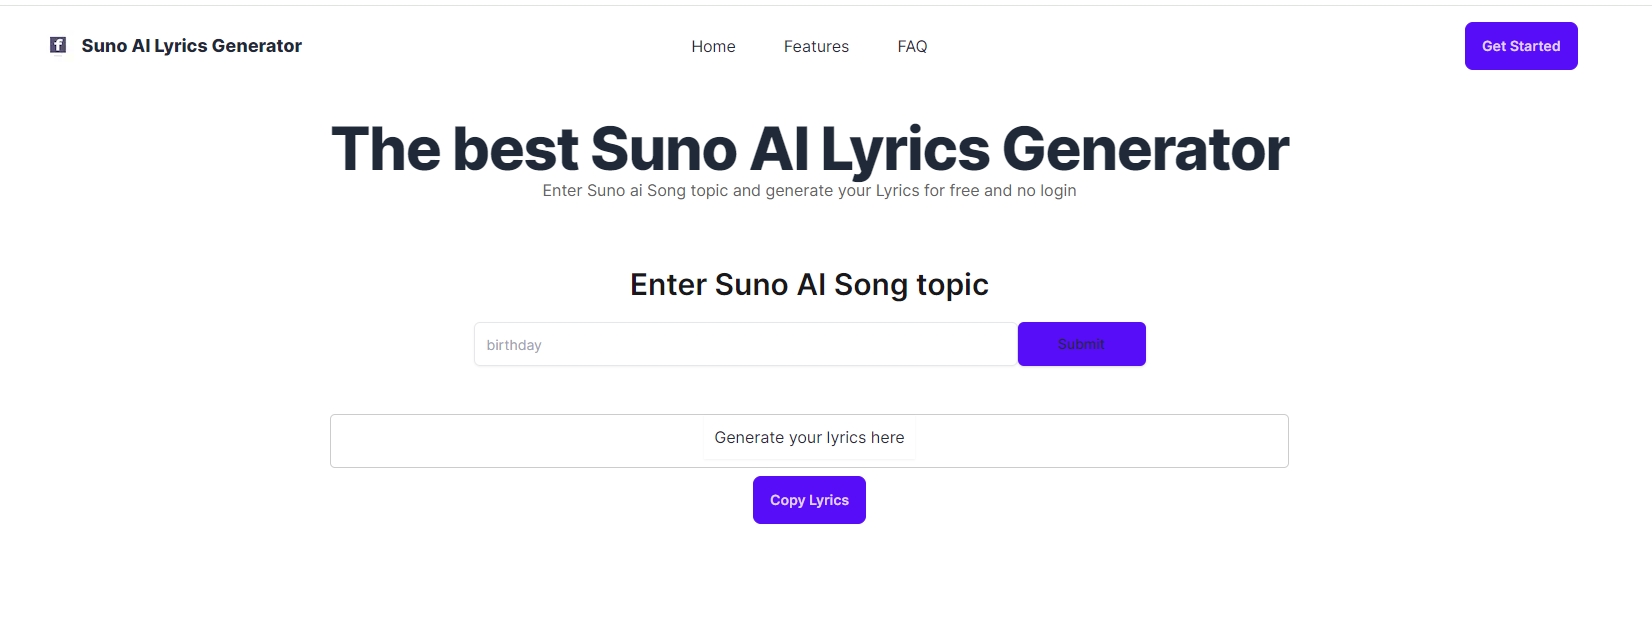 Suno AI can generate complete 2-minute songs including lyrics, melody, and accompaniment from simple prompts, rather than just snippets or accompanime